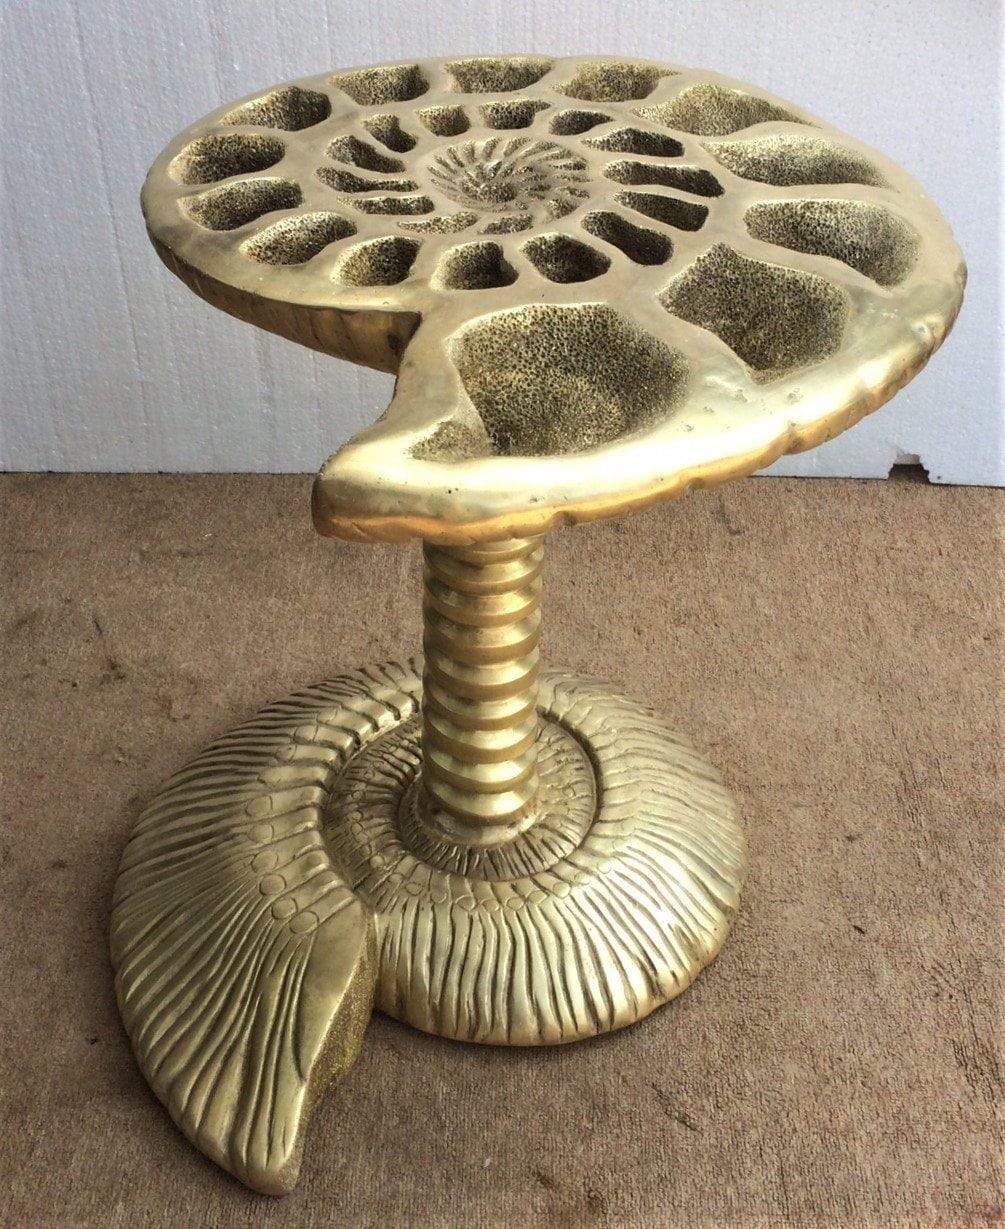 Pyritized ammonite Table {Cast in solid brass} {Please Inquire for More Information}